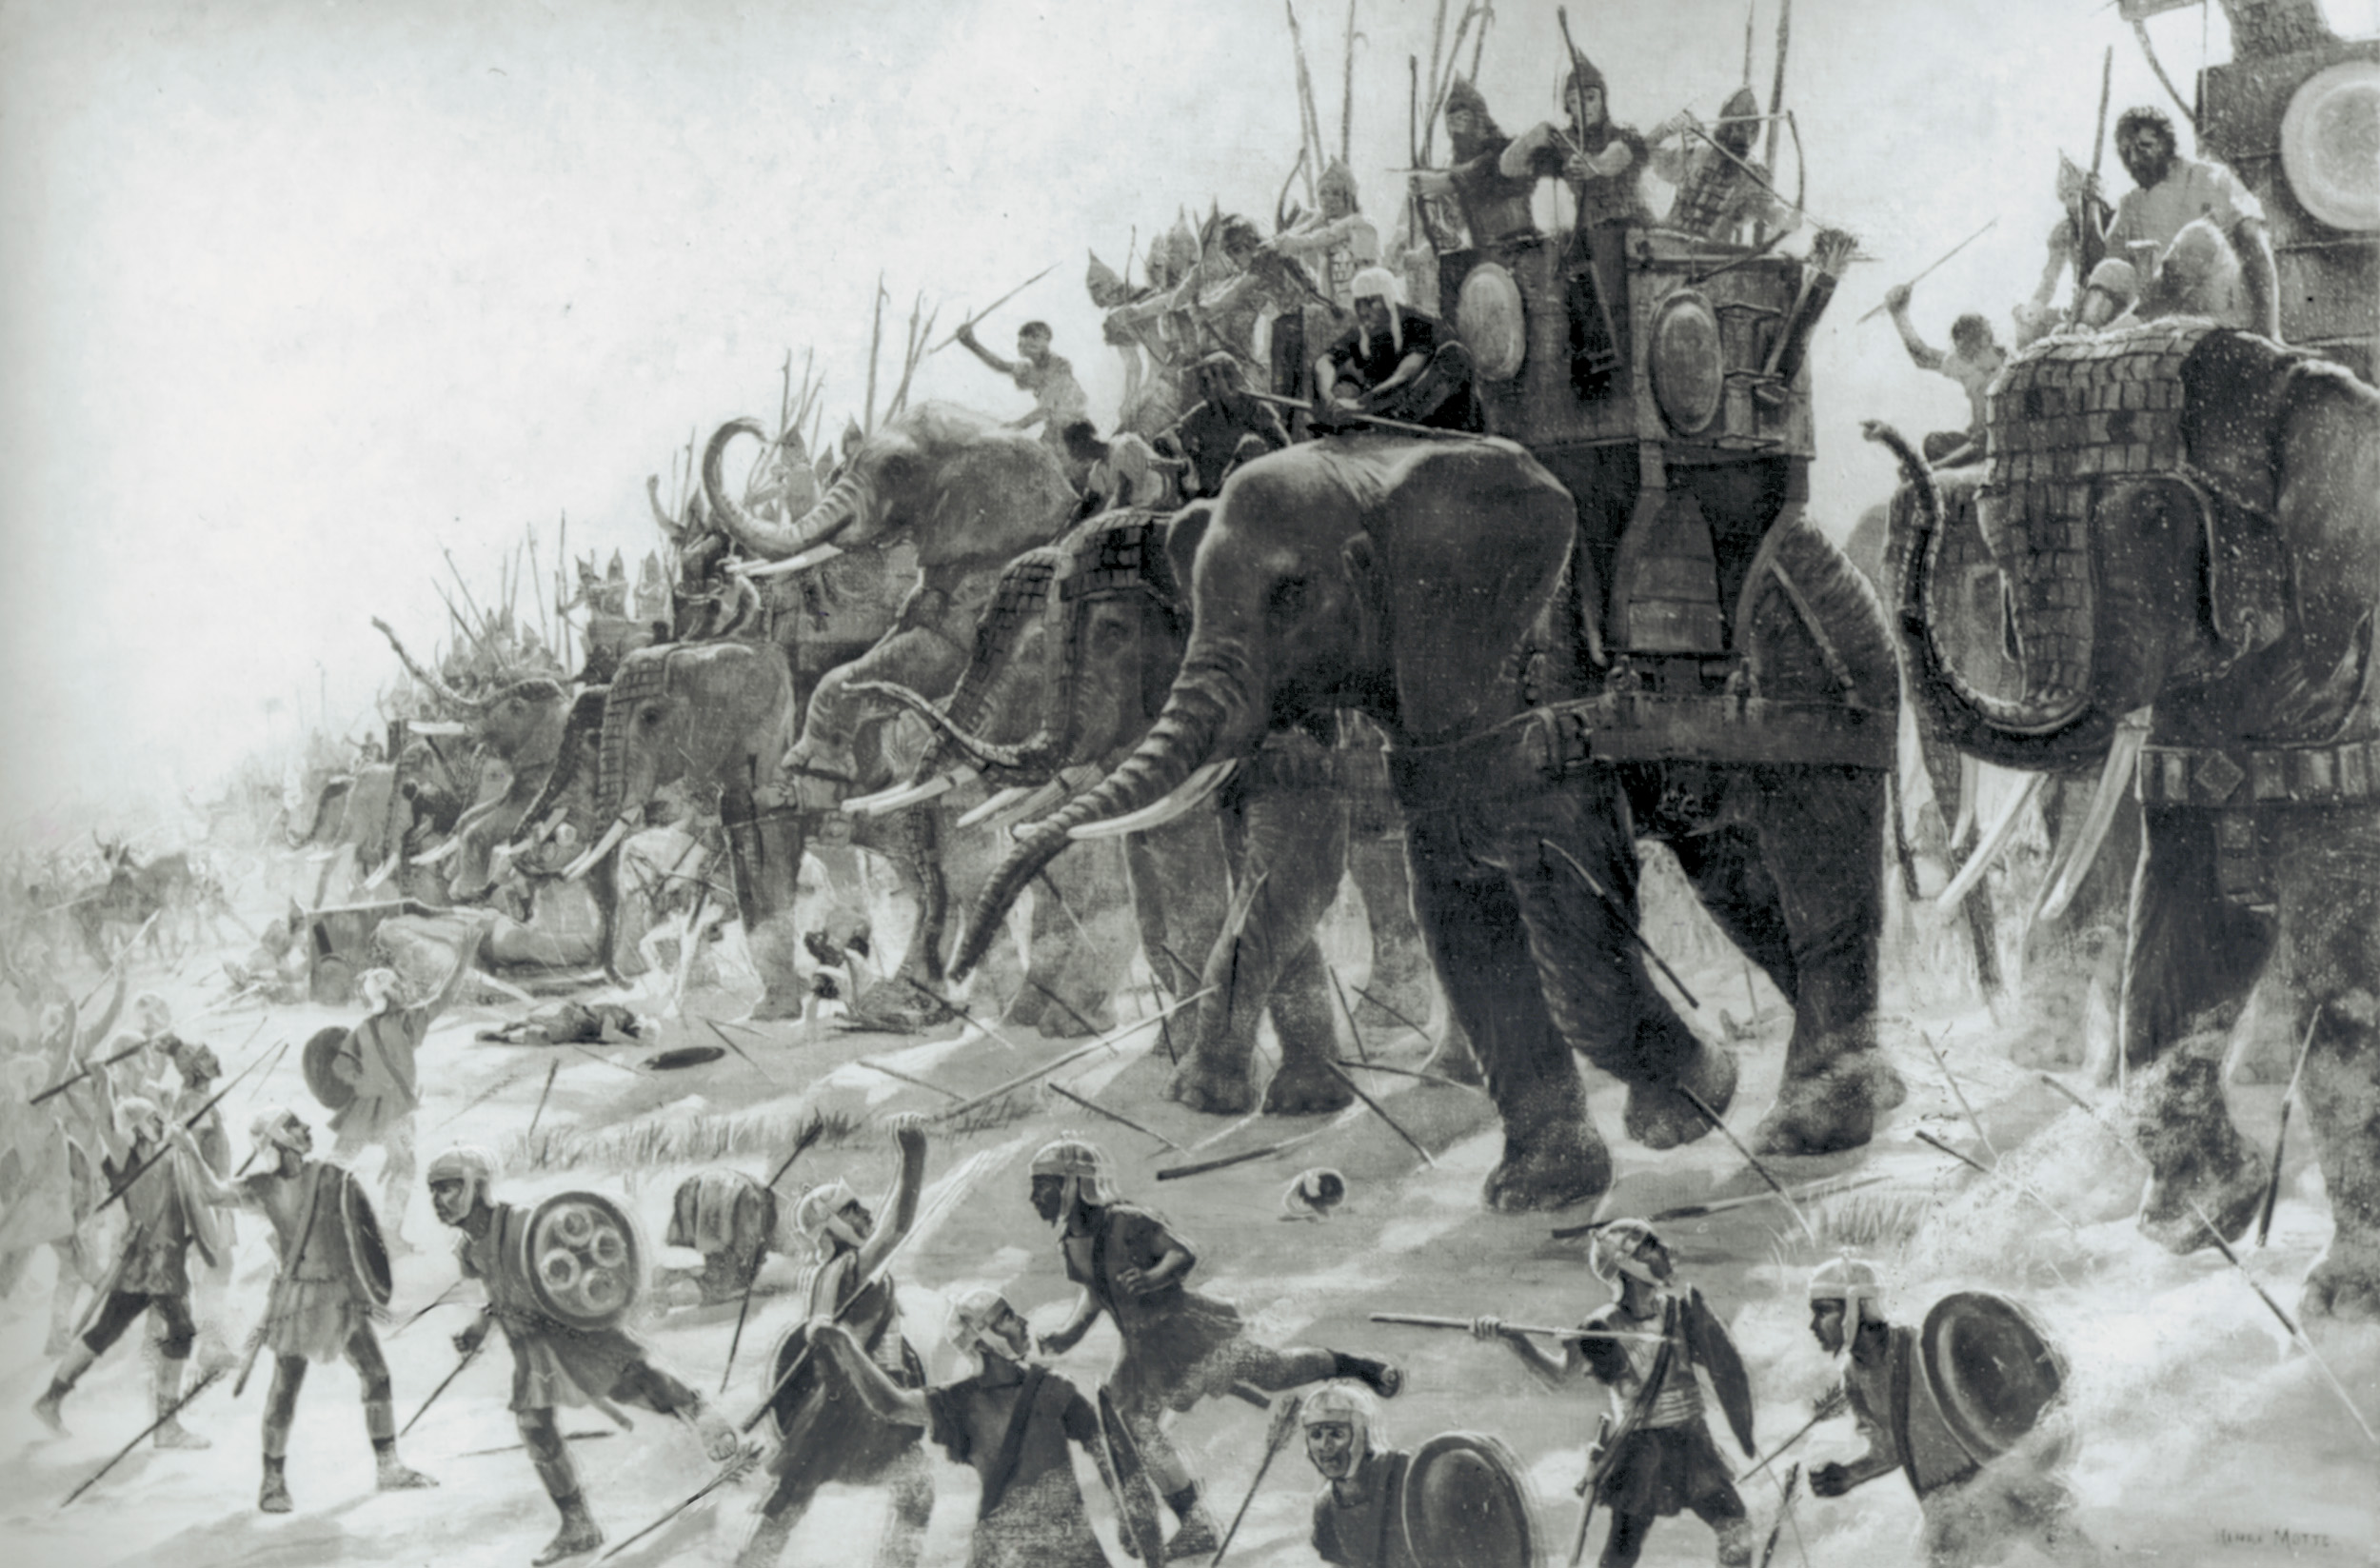 At Zama, Hannibal charged with his elephants. 